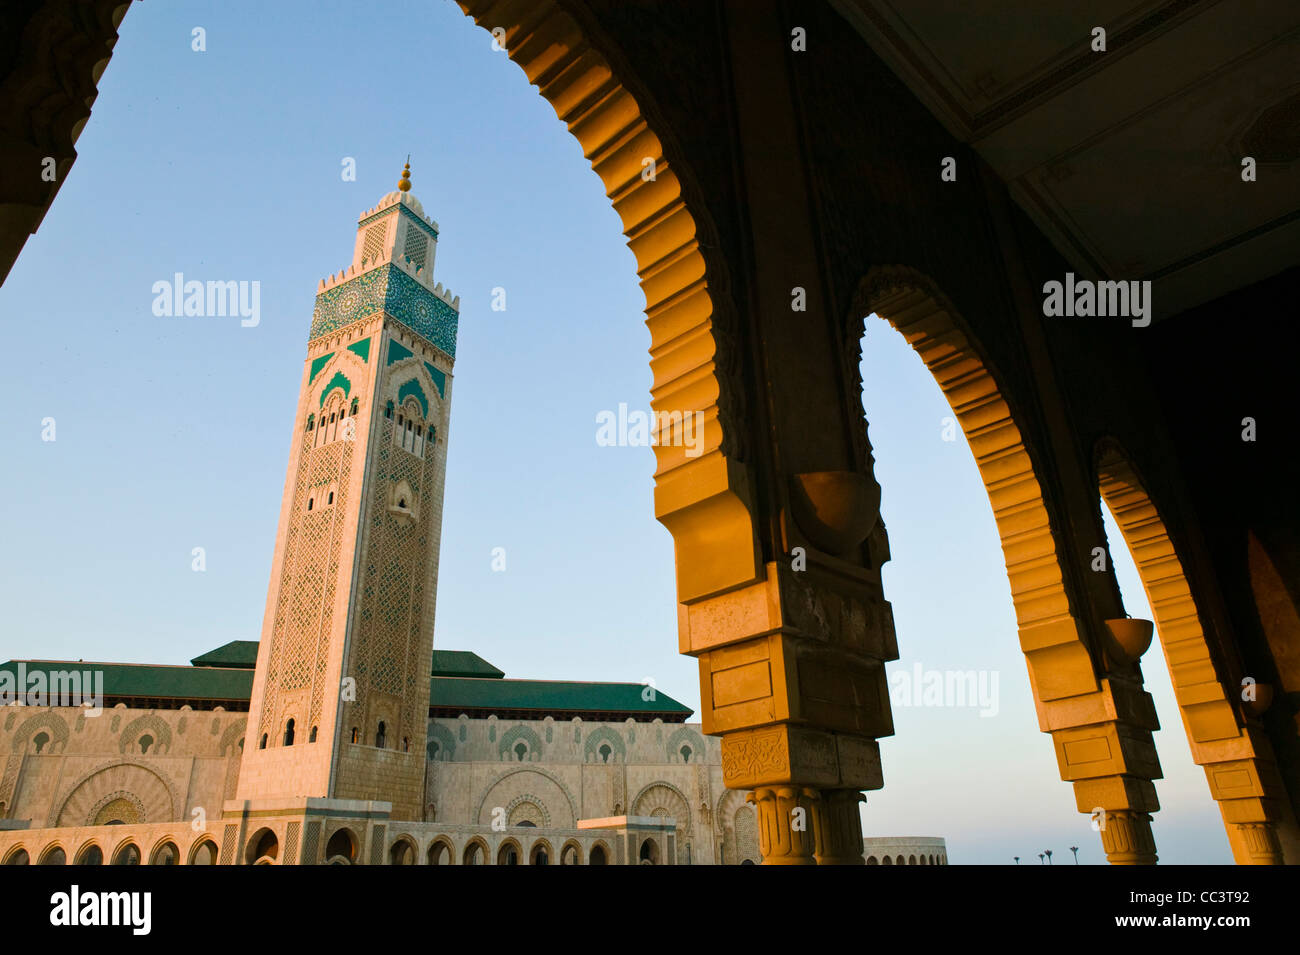 Morocco, Casablanca, Hassan II Mosque (b.1993) Holds 25,000 Worshipers and minaret is 210m tall-The Tallest Minaret in world Stock Photo